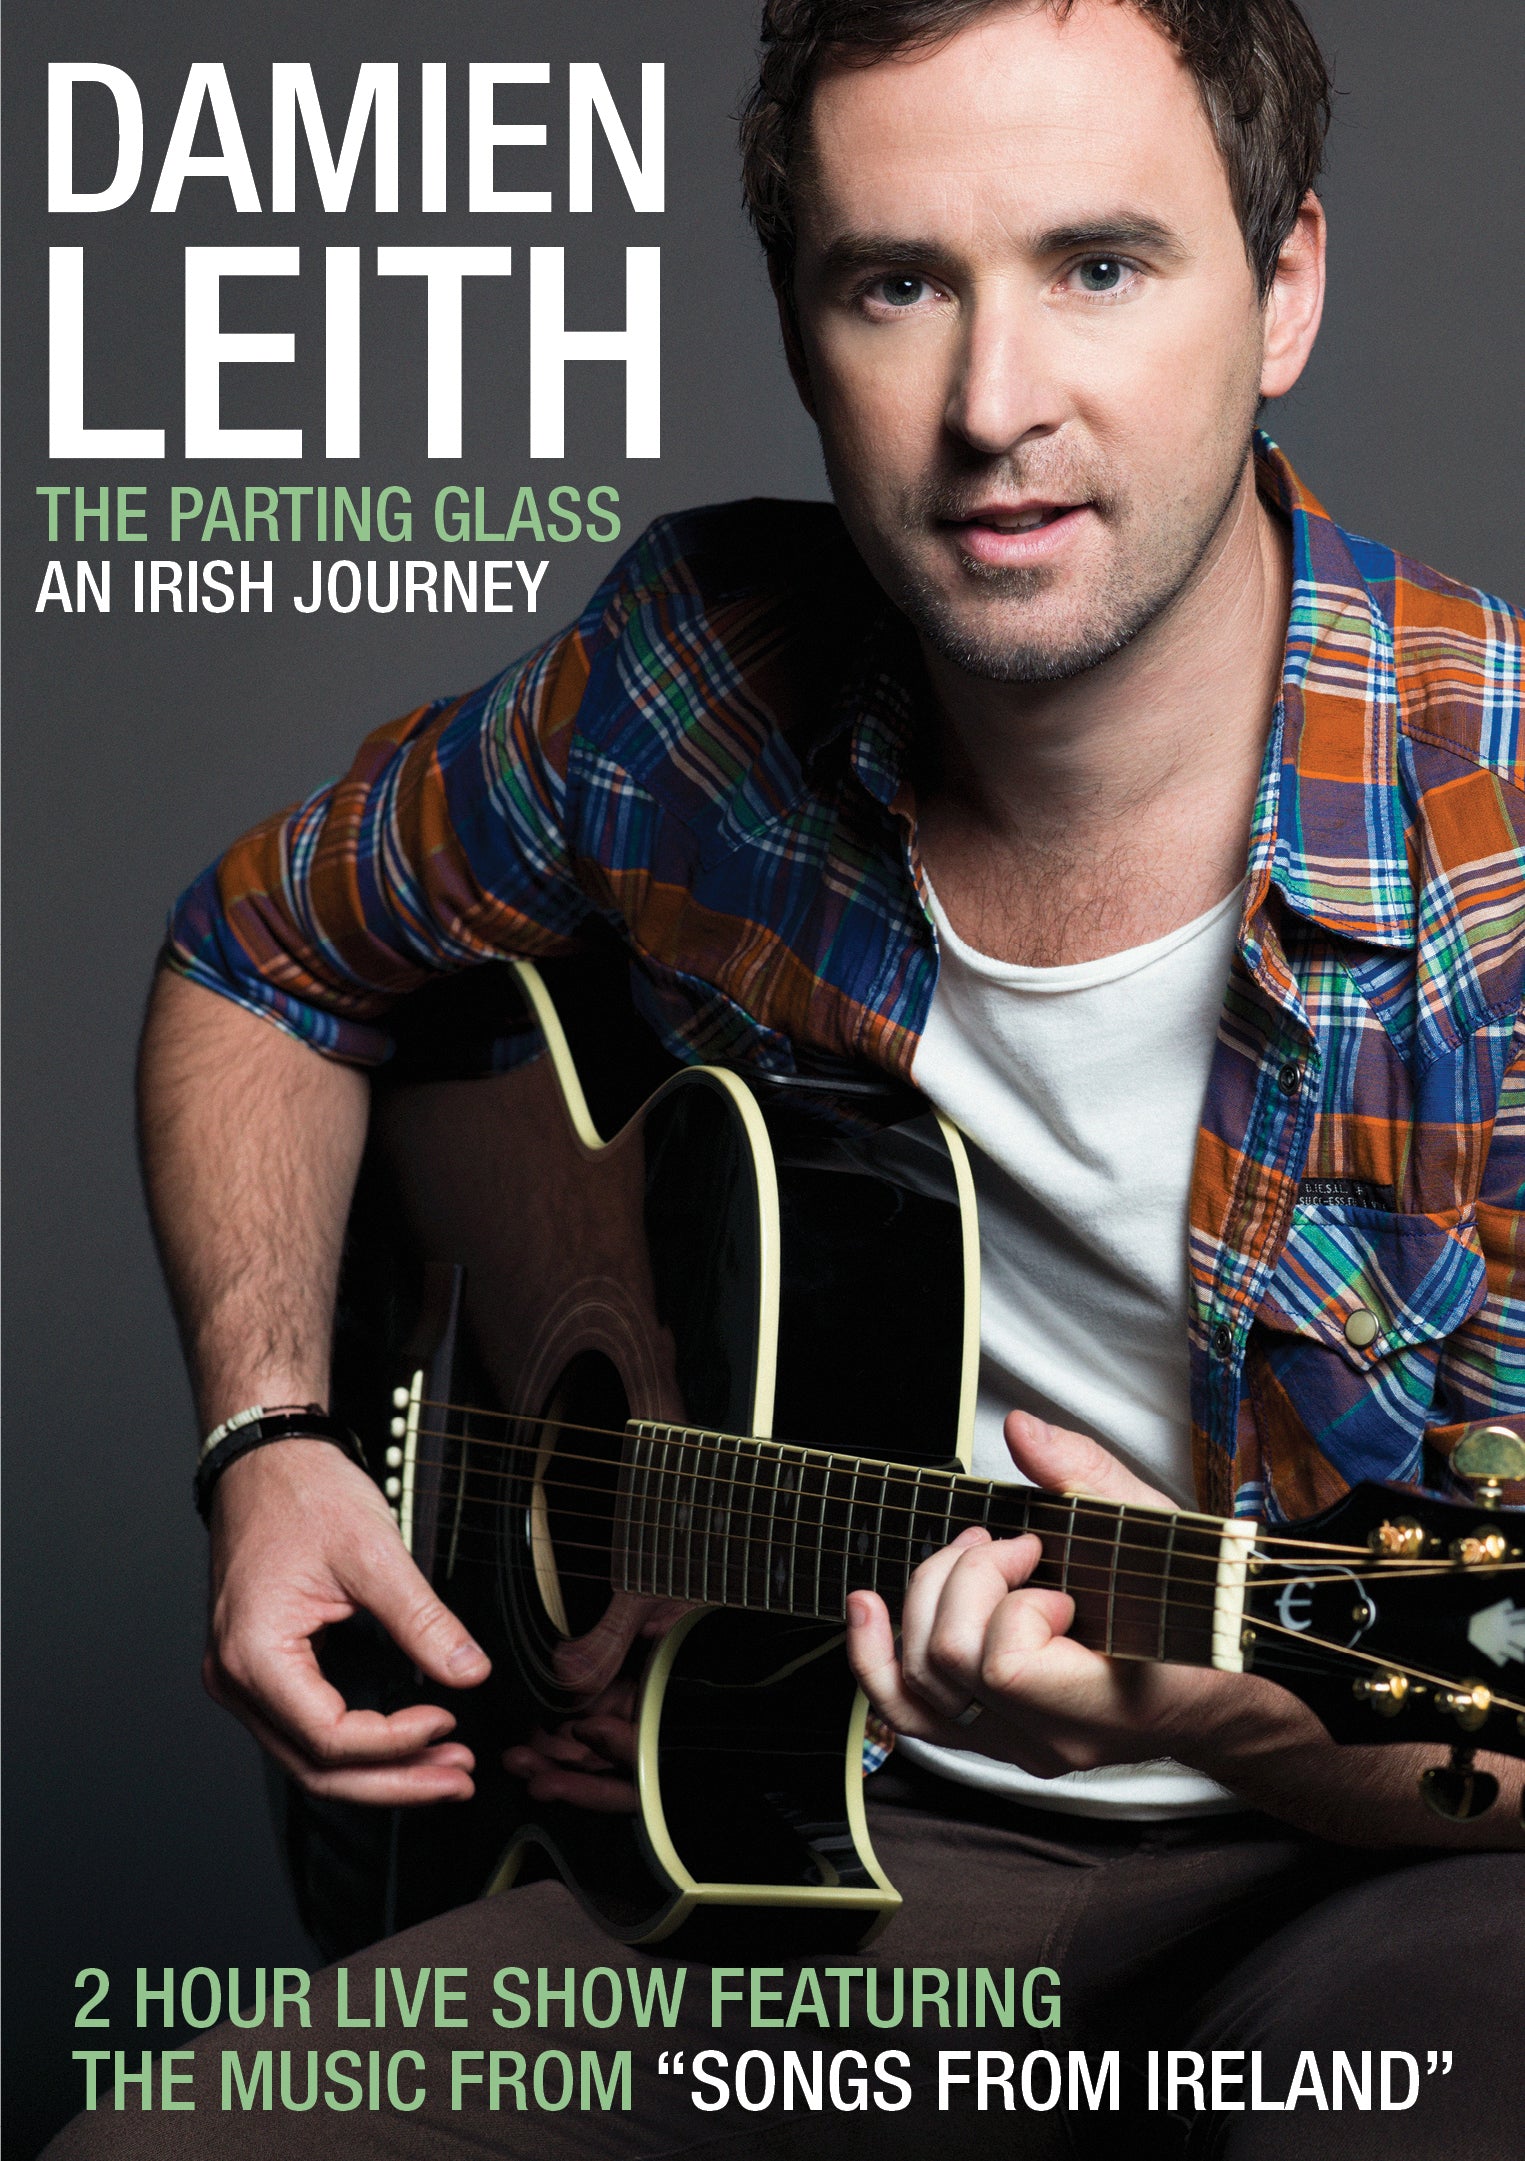 DAMIEN LEITH - THE PARTING GLASS: AN IRISH JOURNEY